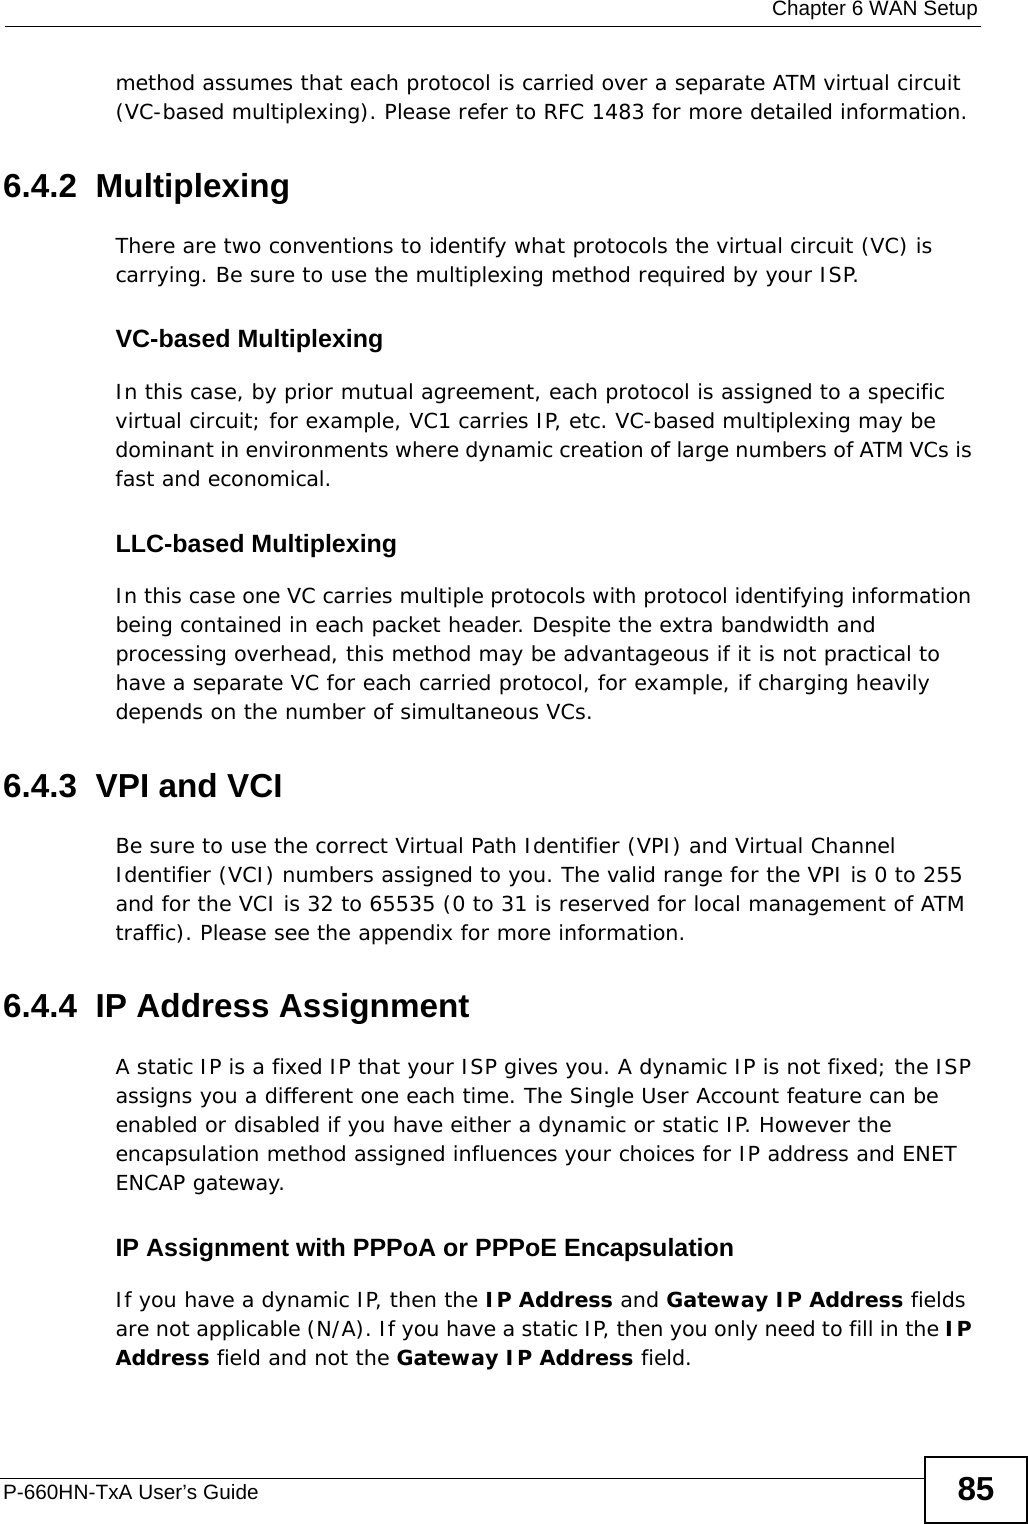  Chapter 6 WAN SetupP-660HN-TxA User’s Guide 85method assumes that each protocol is carried over a separate ATM virtual circuit (VC-based multiplexing). Please refer to RFC 1483 for more detailed information.6.4.2  MultiplexingThere are two conventions to identify what protocols the virtual circuit (VC) is carrying. Be sure to use the multiplexing method required by your ISP.VC-based MultiplexingIn this case, by prior mutual agreement, each protocol is assigned to a specific virtual circuit; for example, VC1 carries IP, etc. VC-based multiplexing may be dominant in environments where dynamic creation of large numbers of ATM VCs is fast and economical.LLC-based MultiplexingIn this case one VC carries multiple protocols with protocol identifying information being contained in each packet header. Despite the extra bandwidth and processing overhead, this method may be advantageous if it is not practical to have a separate VC for each carried protocol, for example, if charging heavily depends on the number of simultaneous VCs.6.4.3  VPI and VCIBe sure to use the correct Virtual Path Identifier (VPI) and Virtual Channel Identifier (VCI) numbers assigned to you. The valid range for the VPI is 0 to 255 and for the VCI is 32 to 65535 (0 to 31 is reserved for local management of ATM traffic). Please see the appendix for more information.6.4.4  IP Address AssignmentA static IP is a fixed IP that your ISP gives you. A dynamic IP is not fixed; the ISP assigns you a different one each time. The Single User Account feature can be enabled or disabled if you have either a dynamic or static IP. However the encapsulation method assigned influences your choices for IP address and ENET ENCAP gateway.IP Assignment with PPPoA or PPPoE EncapsulationIf you have a dynamic IP, then the IP Address and Gateway IP Address fields are not applicable (N/A). If you have a static IP, then you only need to fill in the IP Address field and not the Gateway IP Address field.